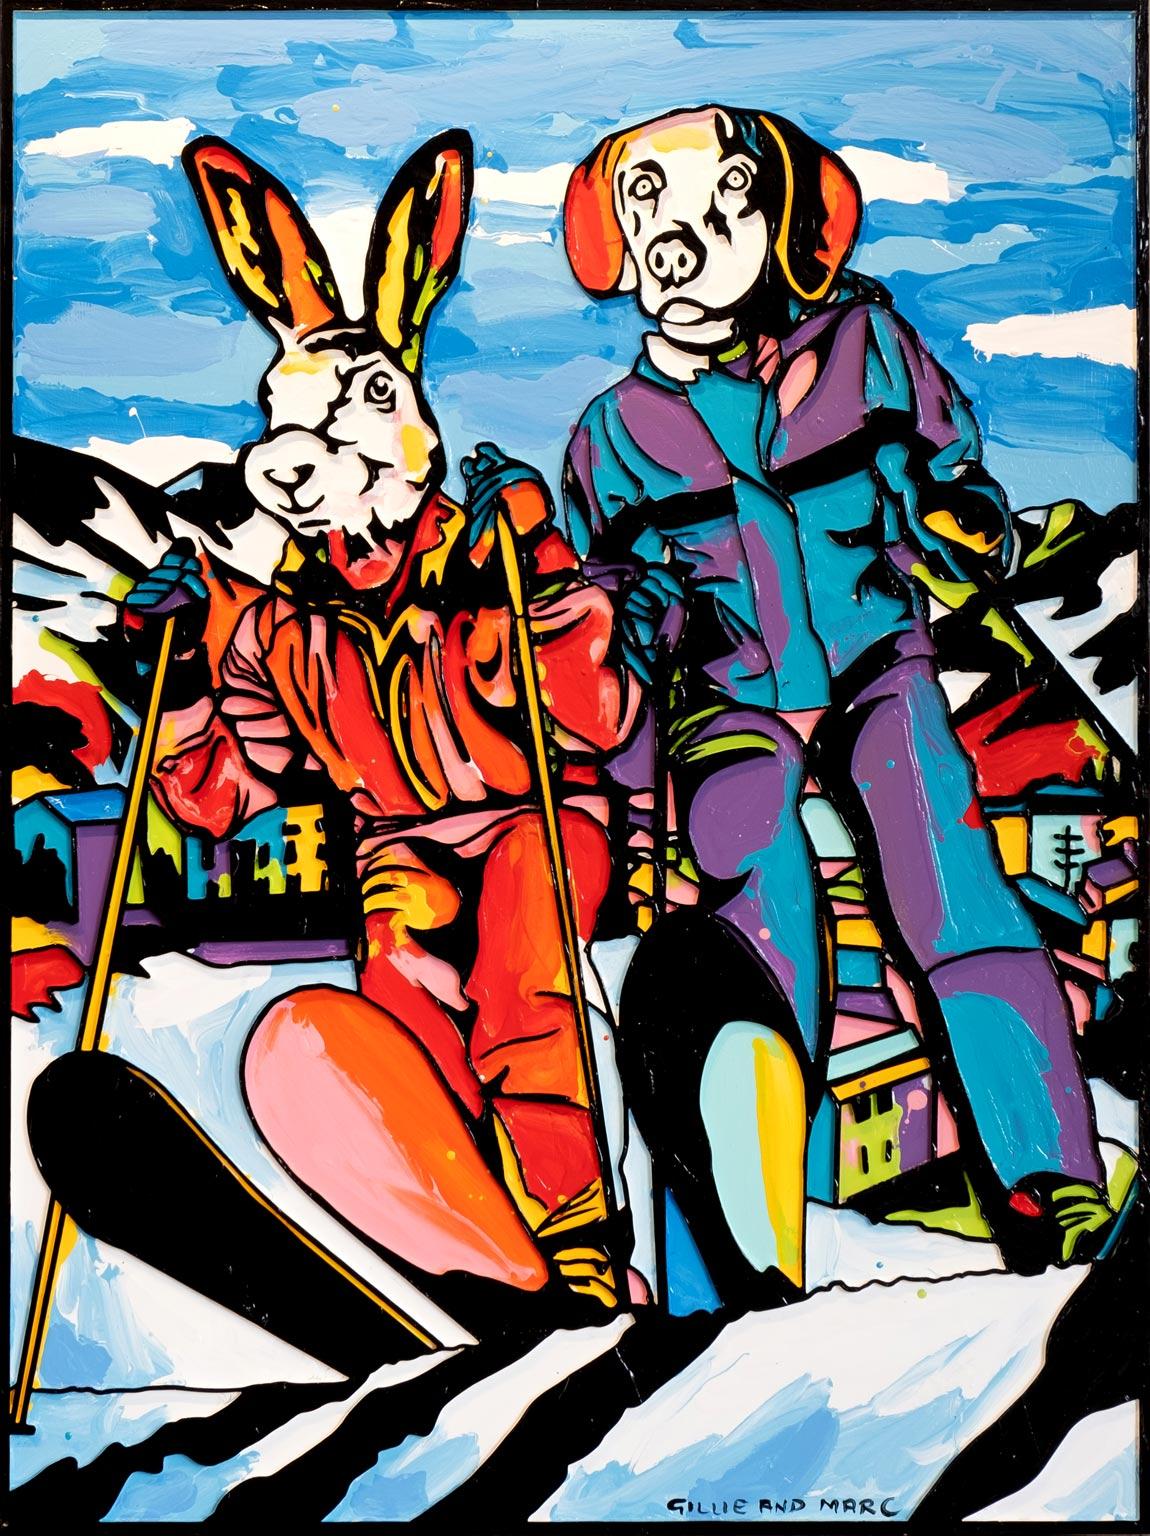 Gillie and Marc Schattner Figurative Print - Animal Pop Art - Print - Gillie and Marc - Limited Edition - She's a ski bunny